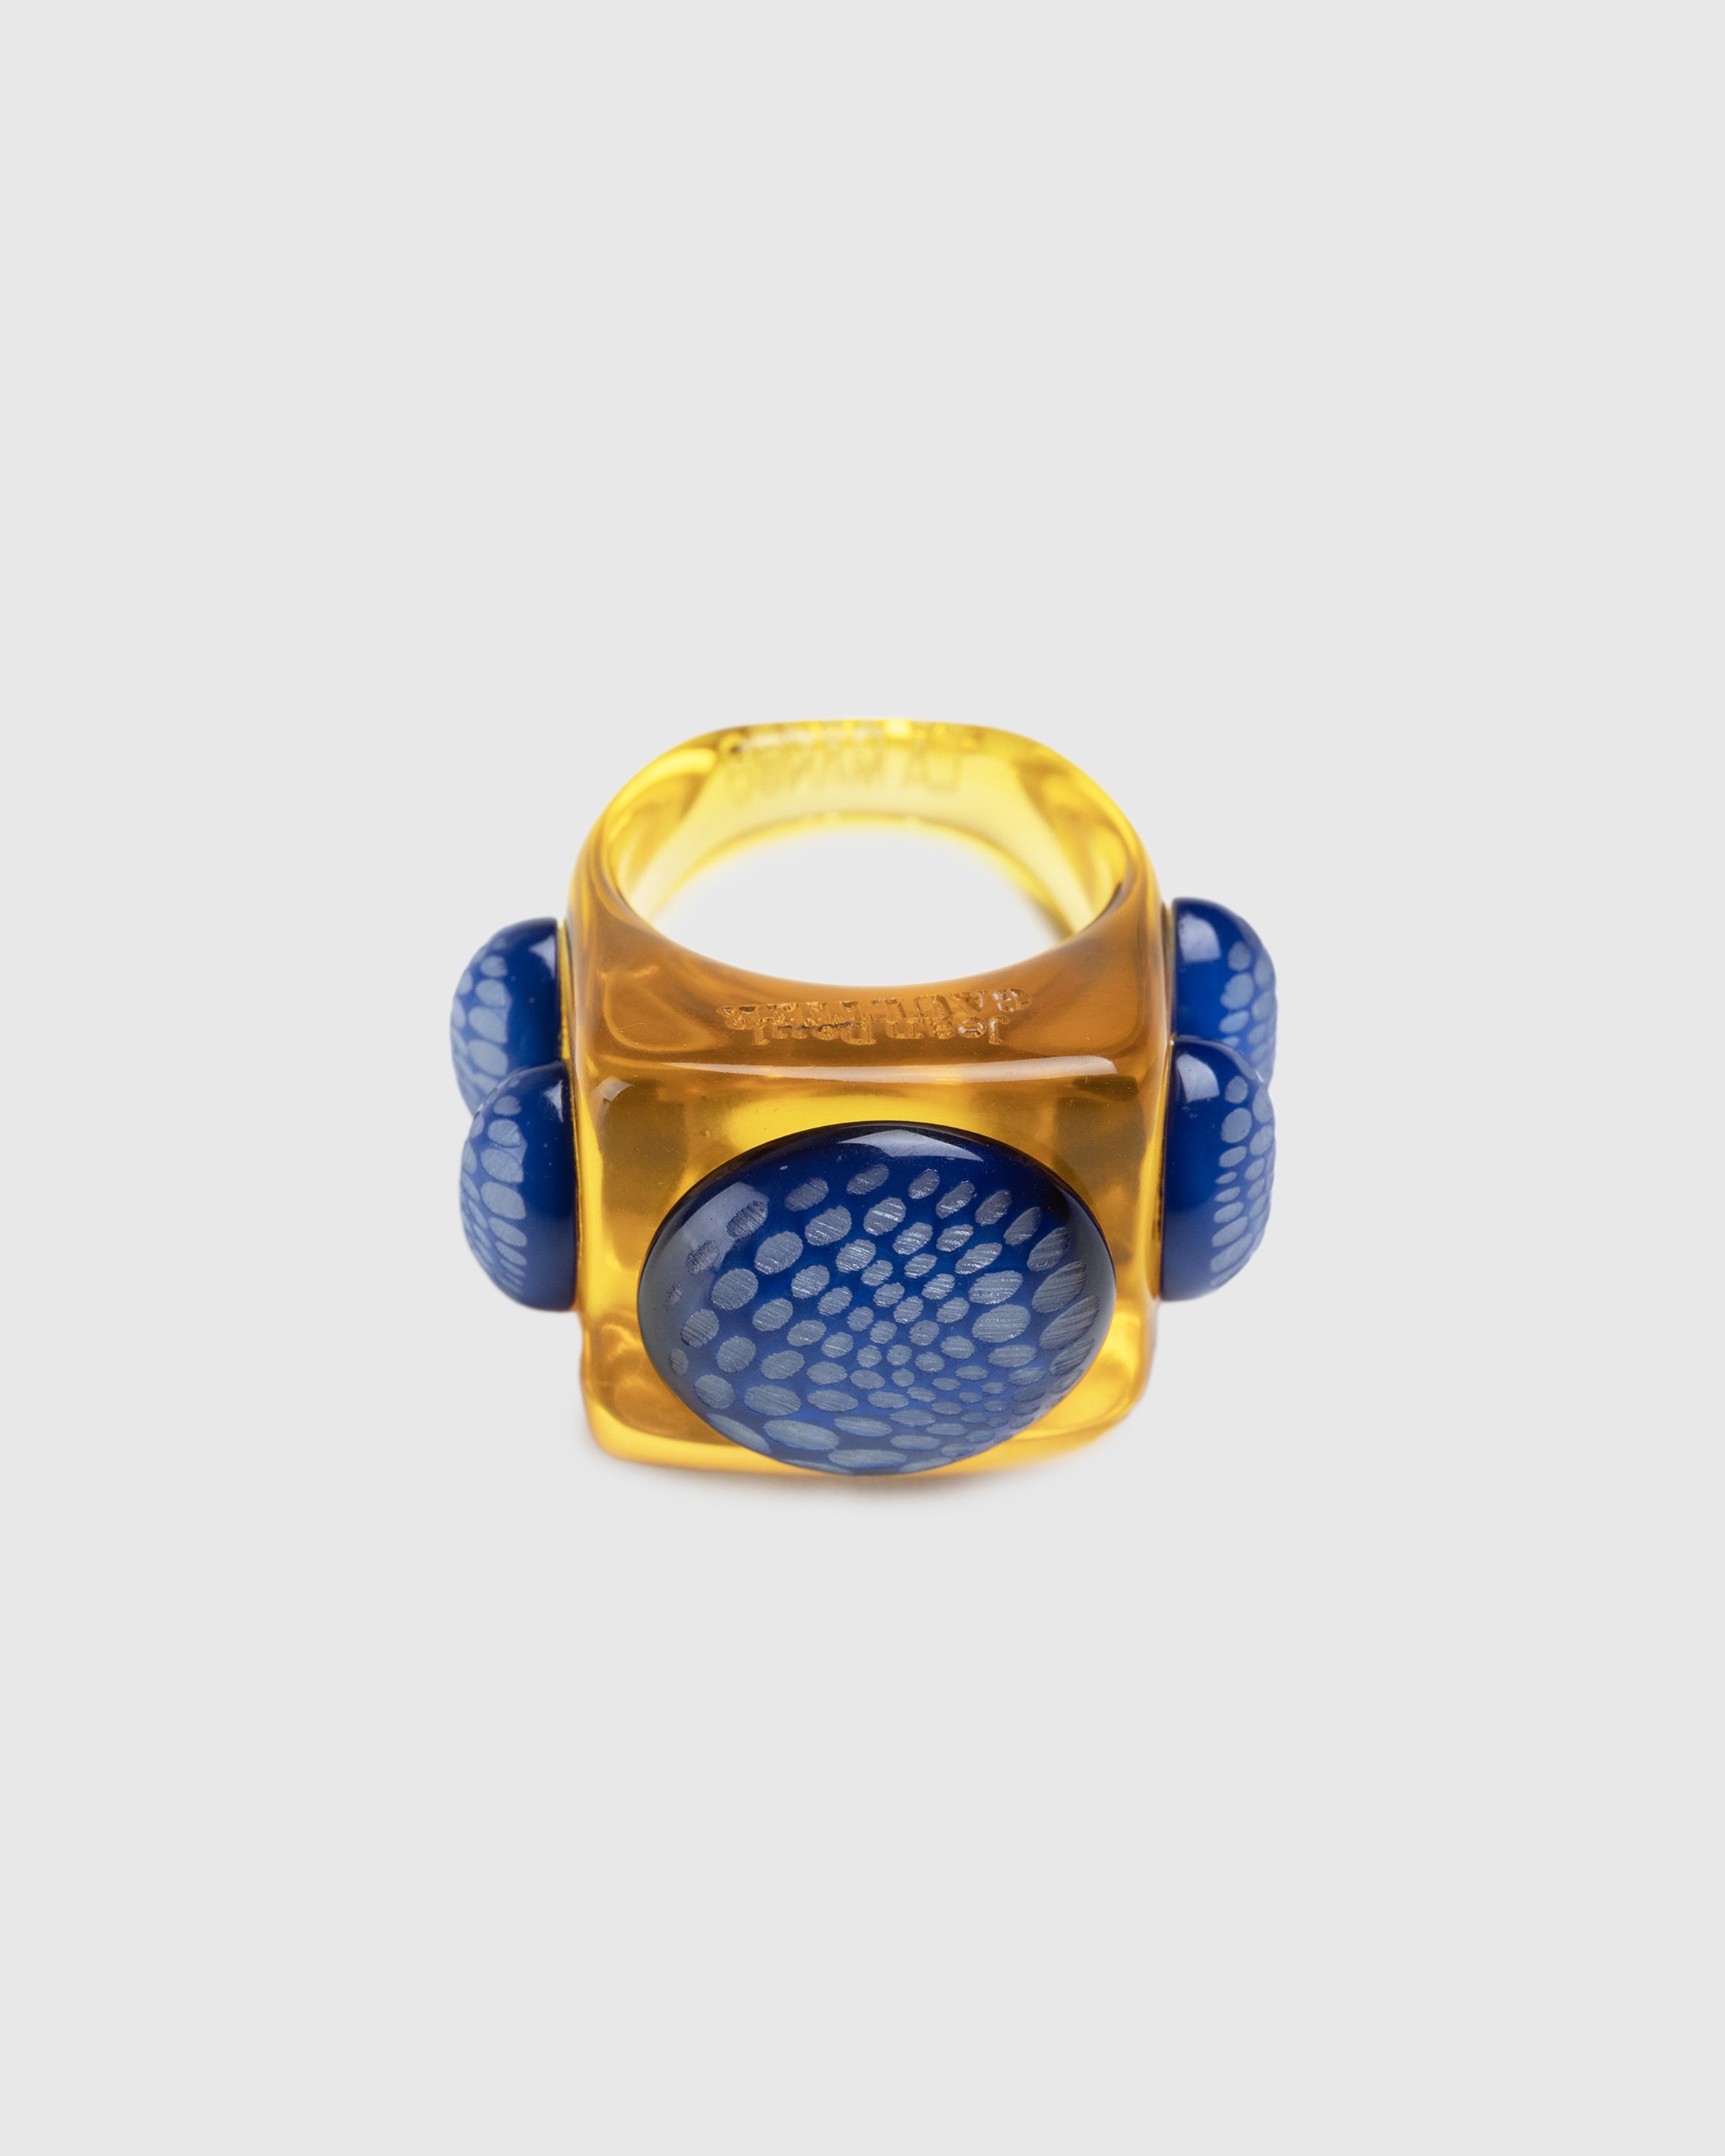 Jean Paul Gaultier - Submarine Ring Amber/Perseo Blue - Accessories - Orange - Image 2